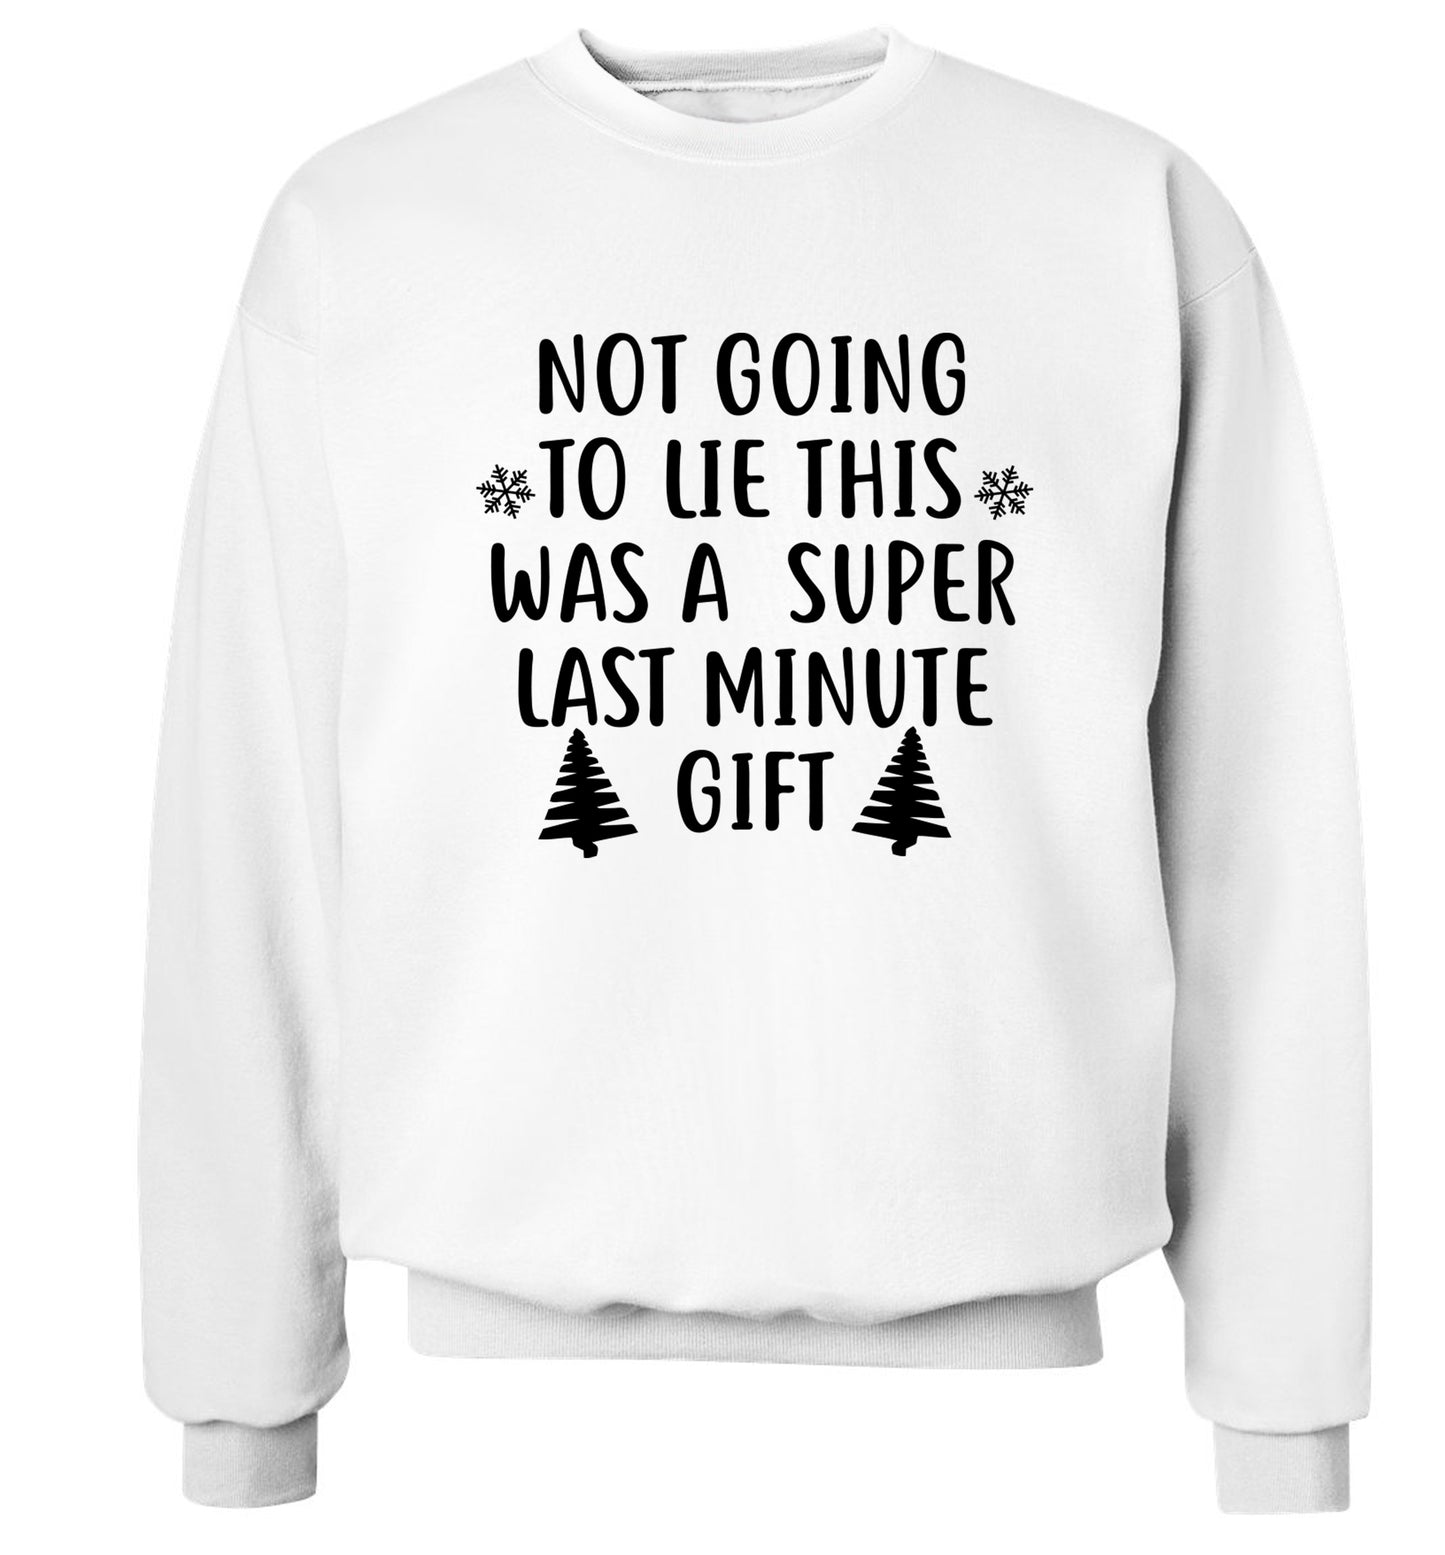 Not going to lie this was a super last minute gift Adult's unisex white Sweater 2XL